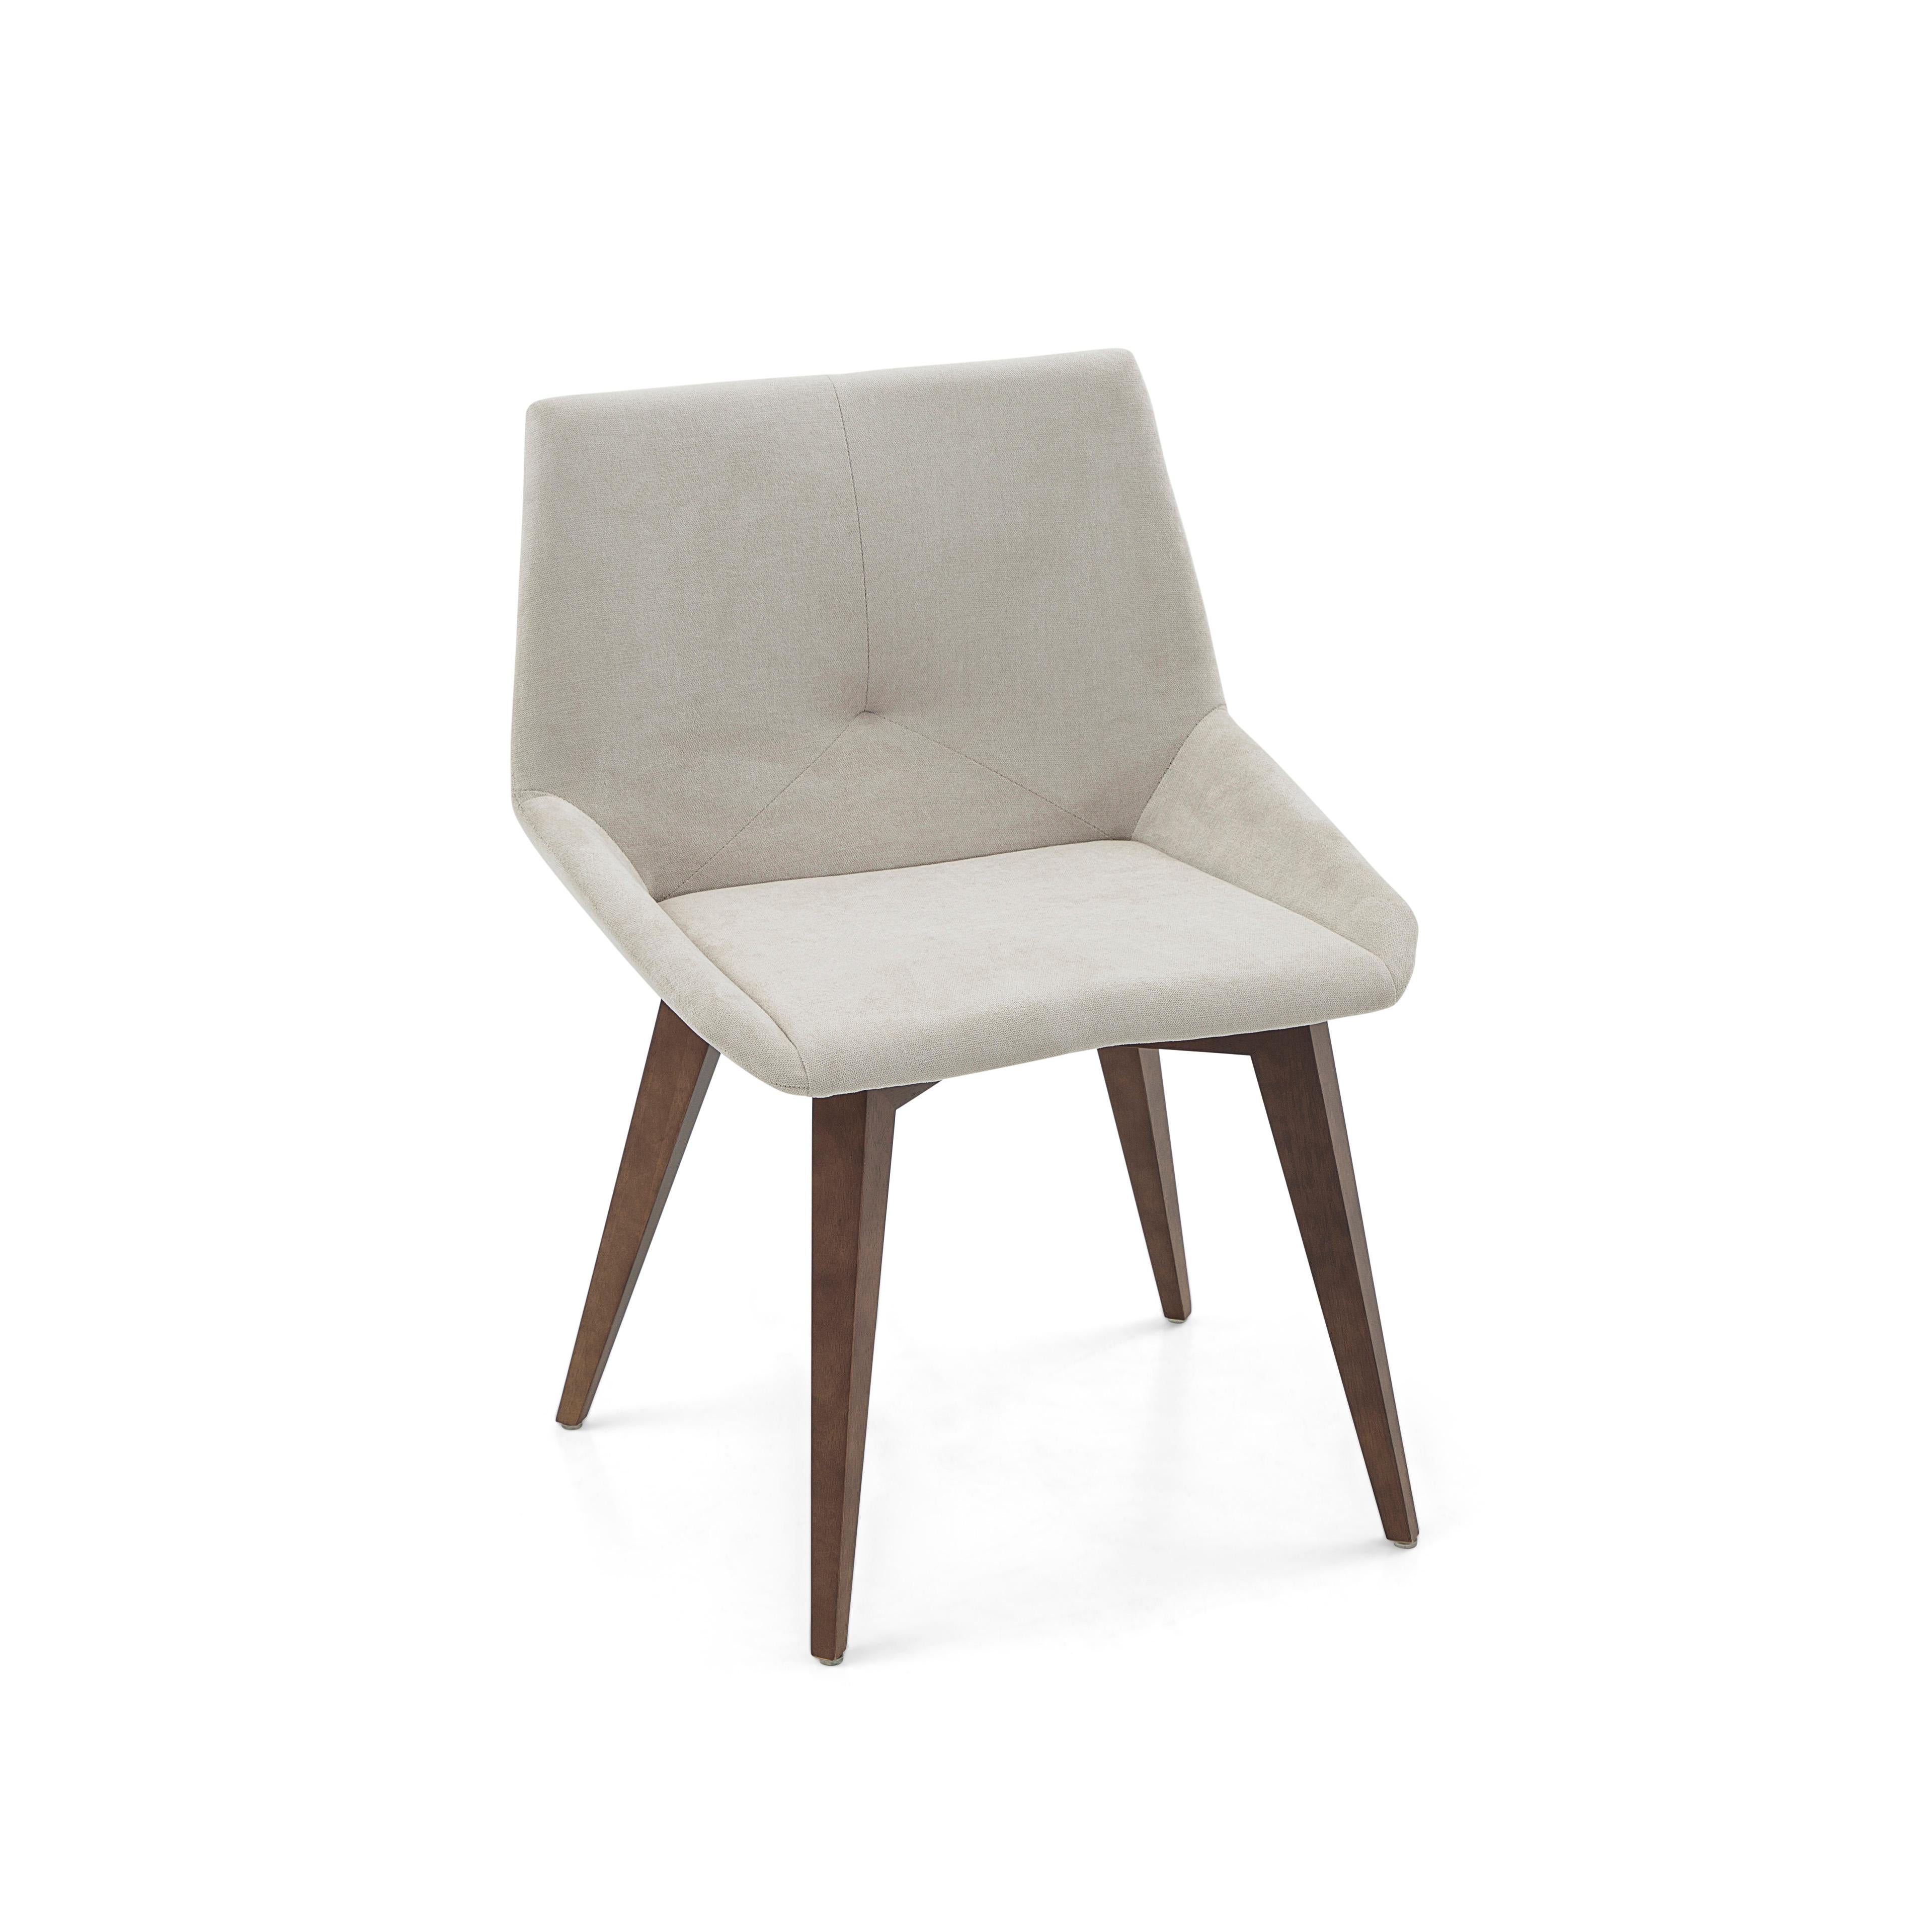 Geometric Cubi Dining Chair with Walnut Wood Base and Light Gray Fabric For Sale